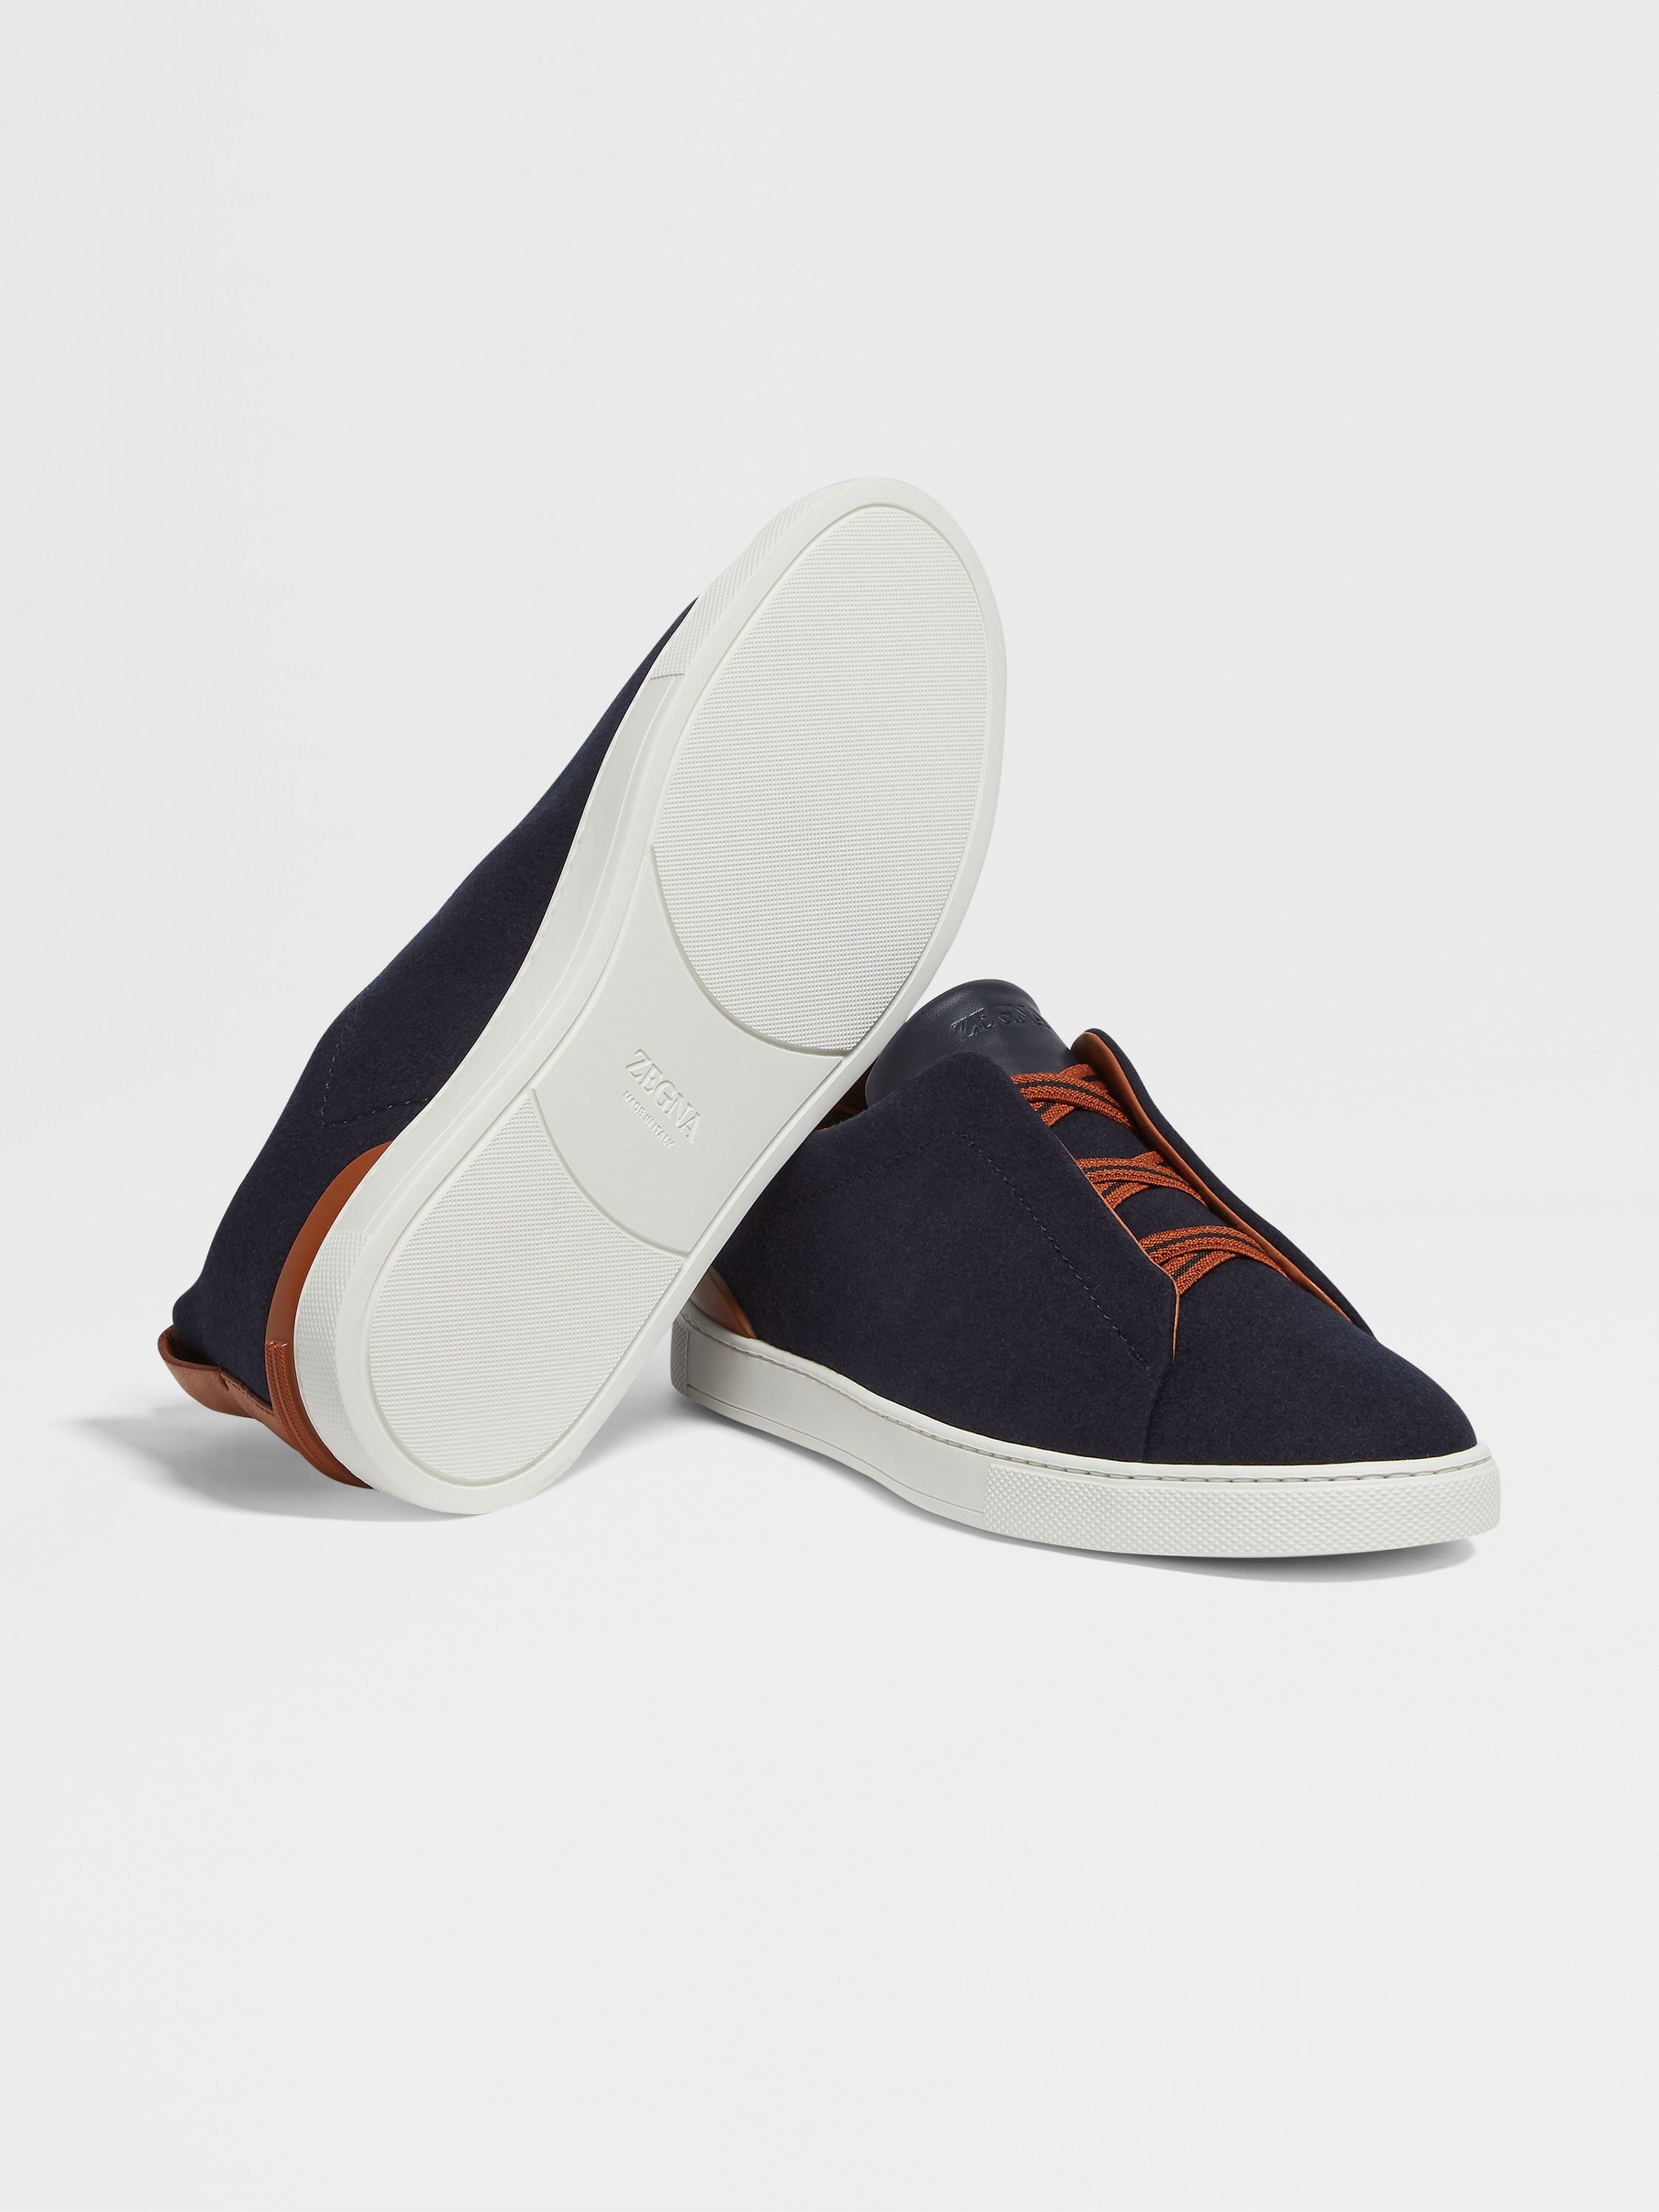 NAVY BLUE #USETHEEXISTING™ WOOL TRIPLE STITCH™ SNEAKERS - 5